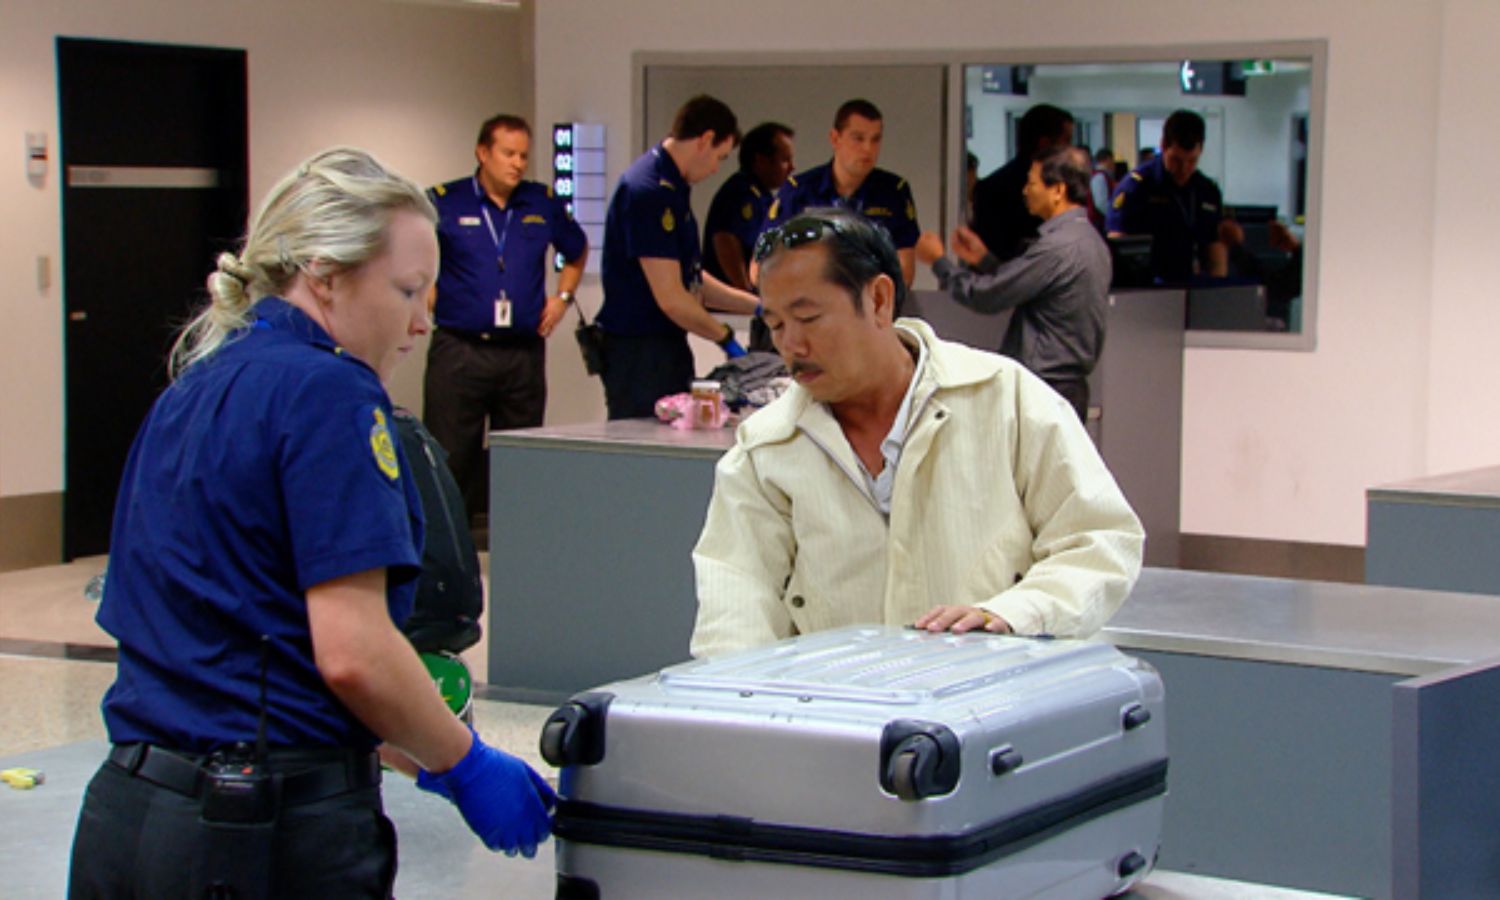 An image from the show border secuirty.